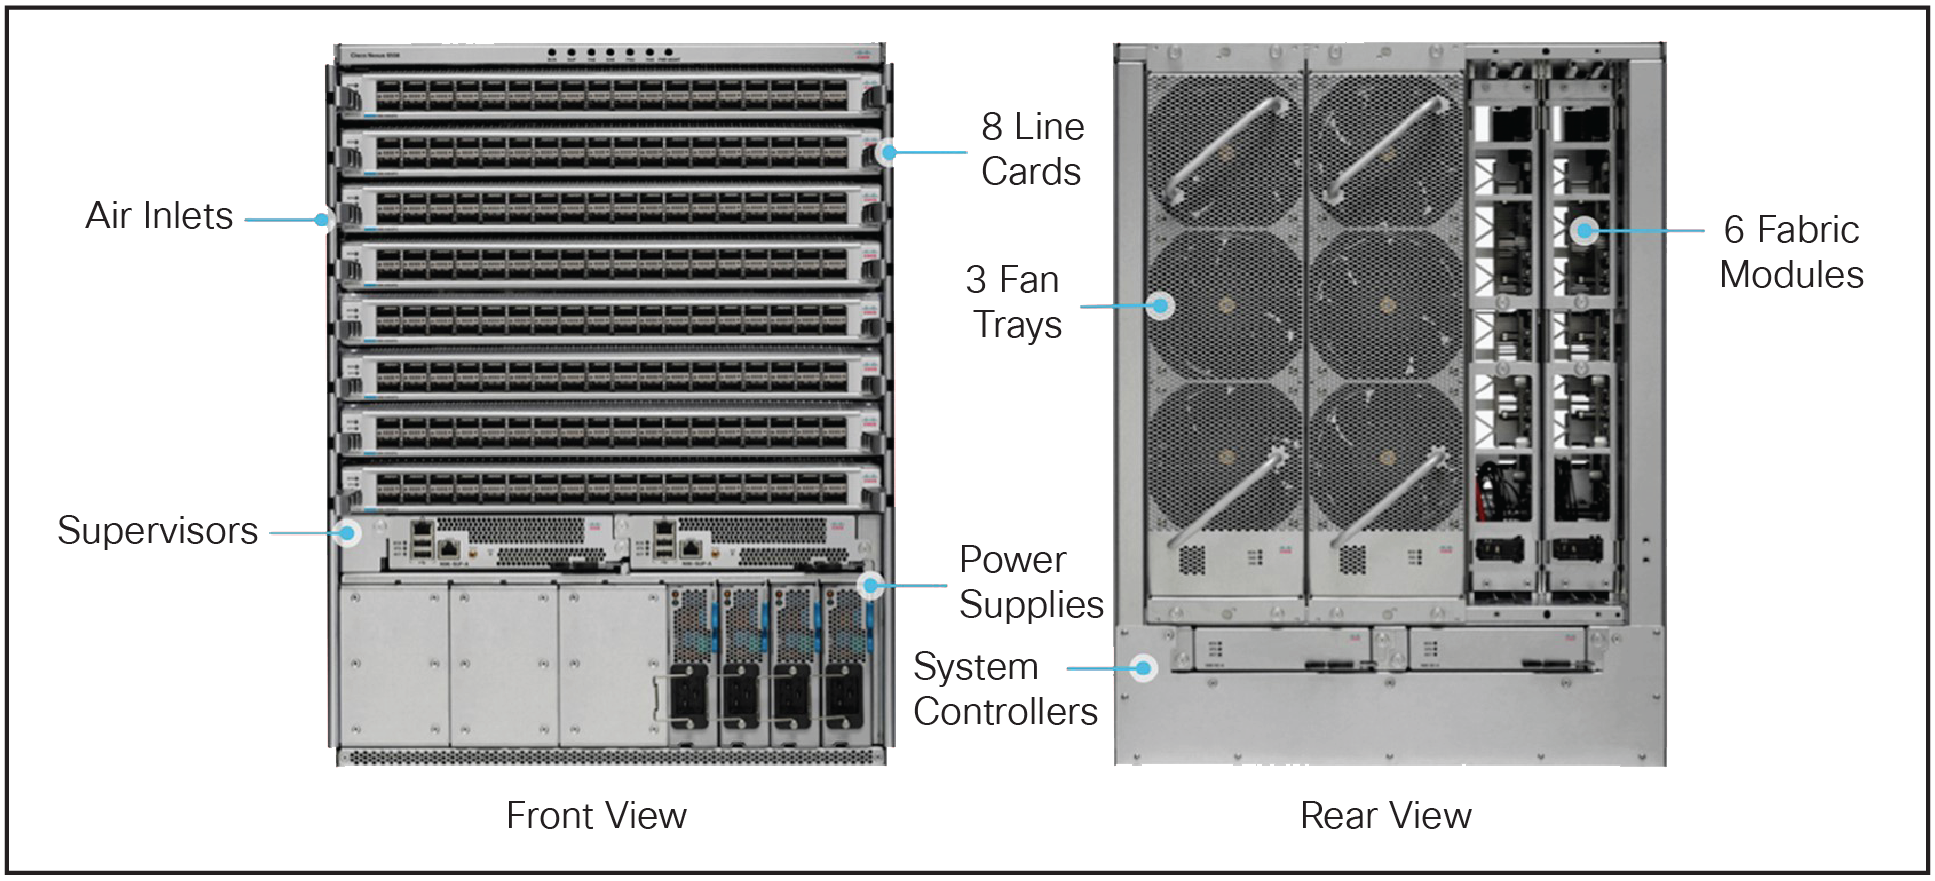 Cisco NCS 5508 chassis components